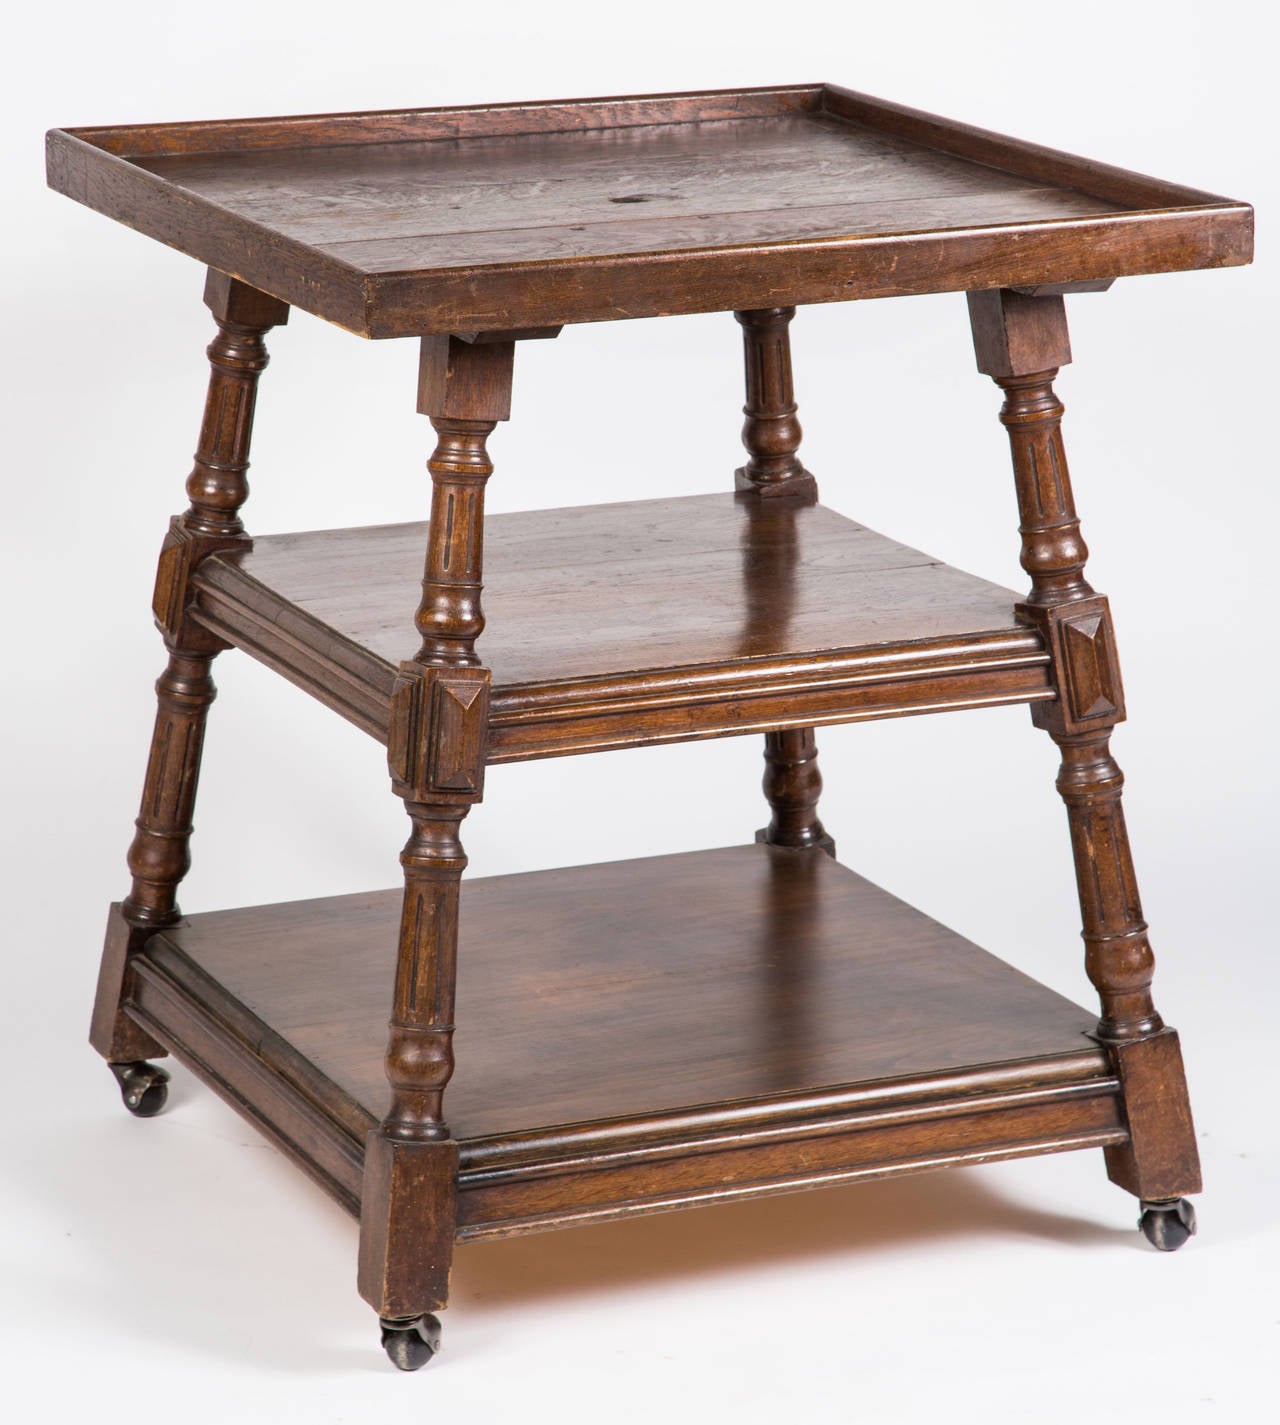 Square tray style table. Three-tiered with wheels. Dark oak wood.